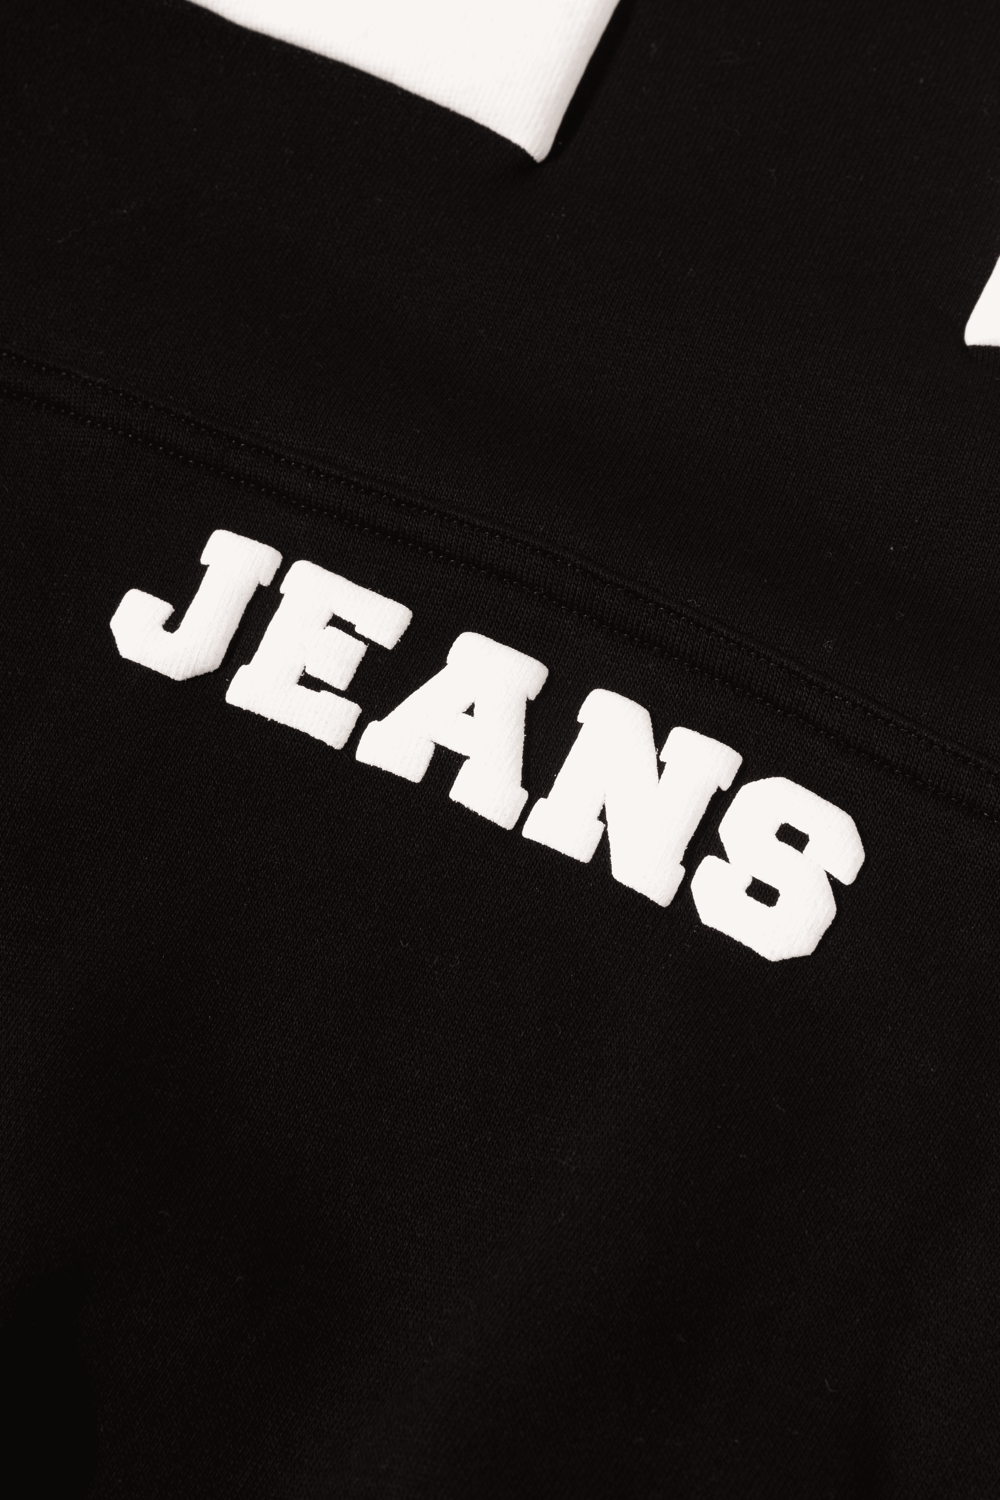 TRILLION JEANS BLACK PULL OVER HOODIE